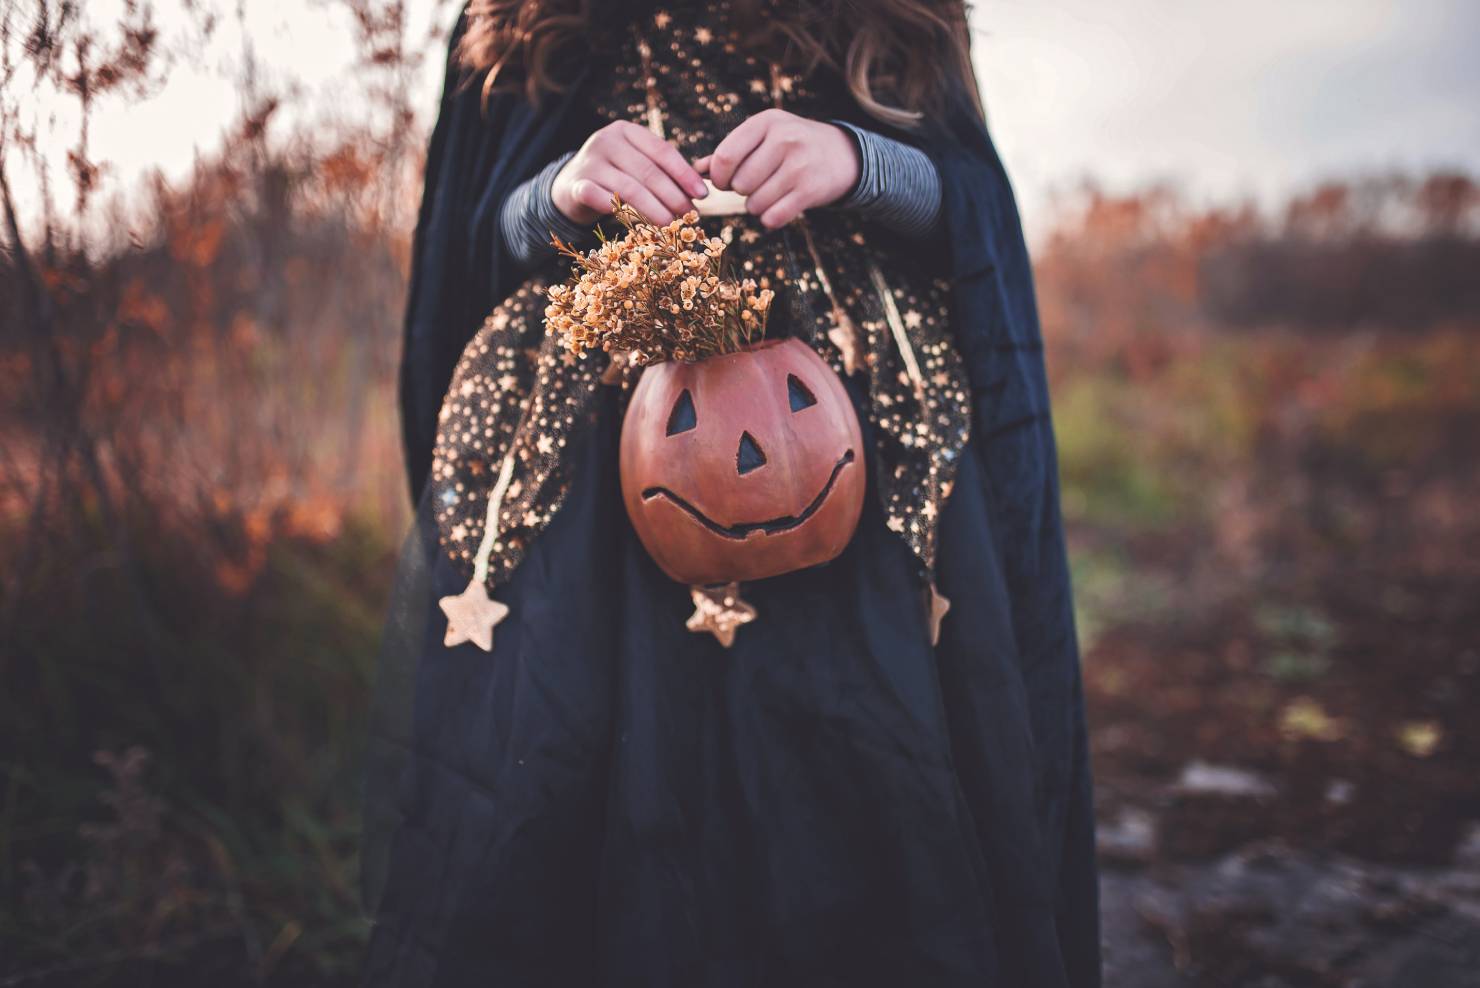 photo of a young girl wearing a black cloak, holding a small pumpkin basket with dried flowers, should christians celebrate halloween